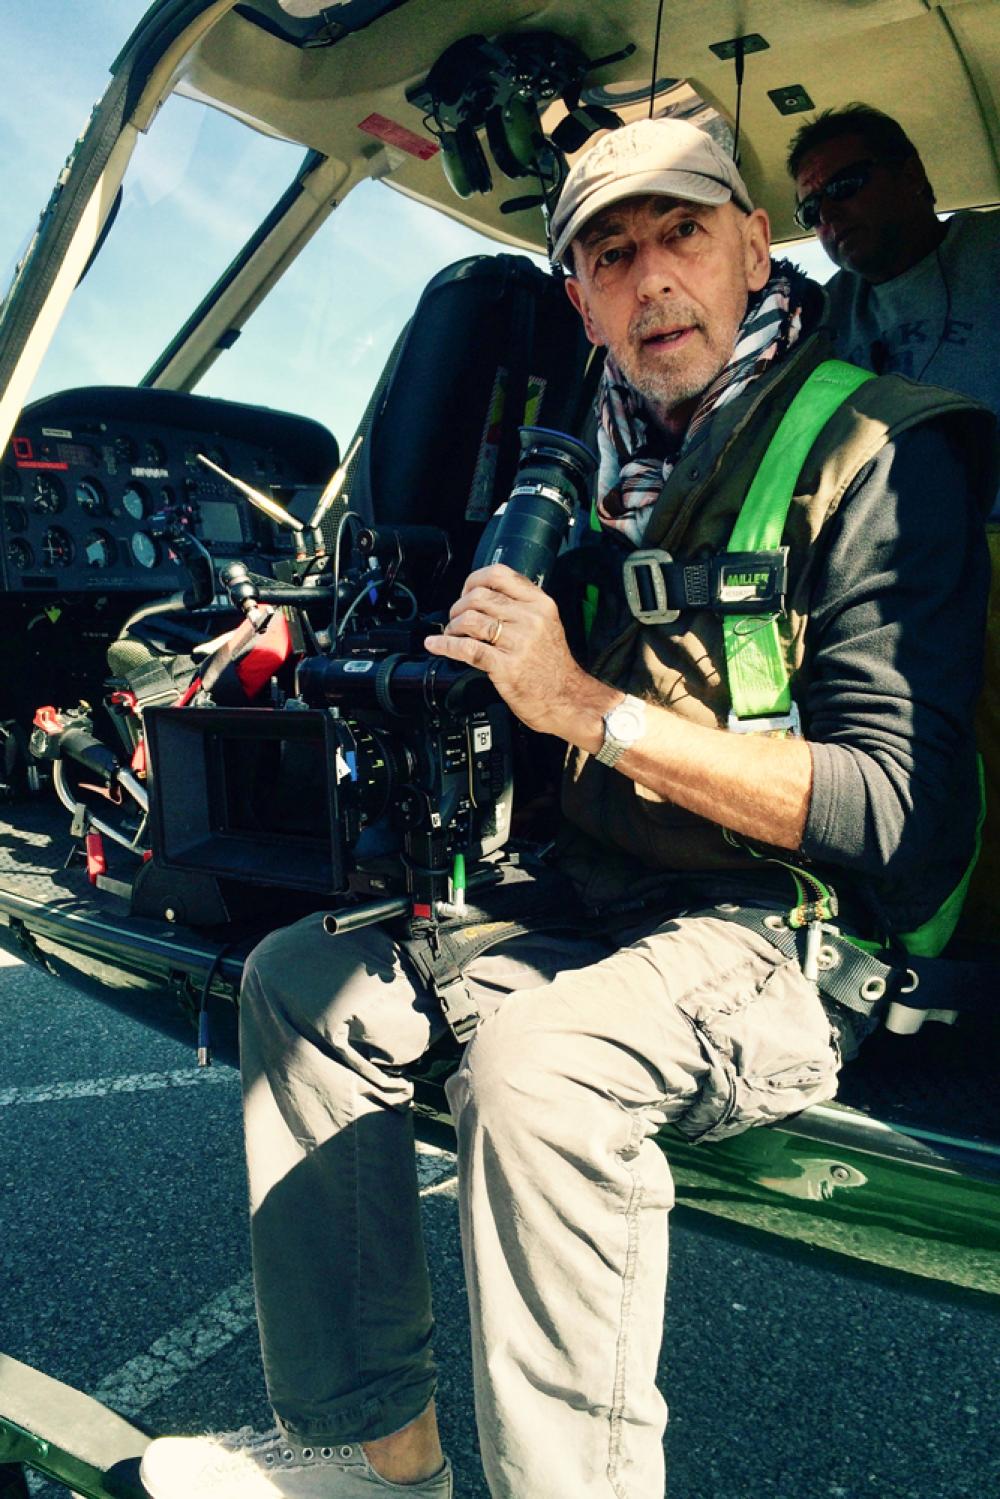 Stuart Dryburgh, holding a camera and sitting in a helicopter on the ground with its door open